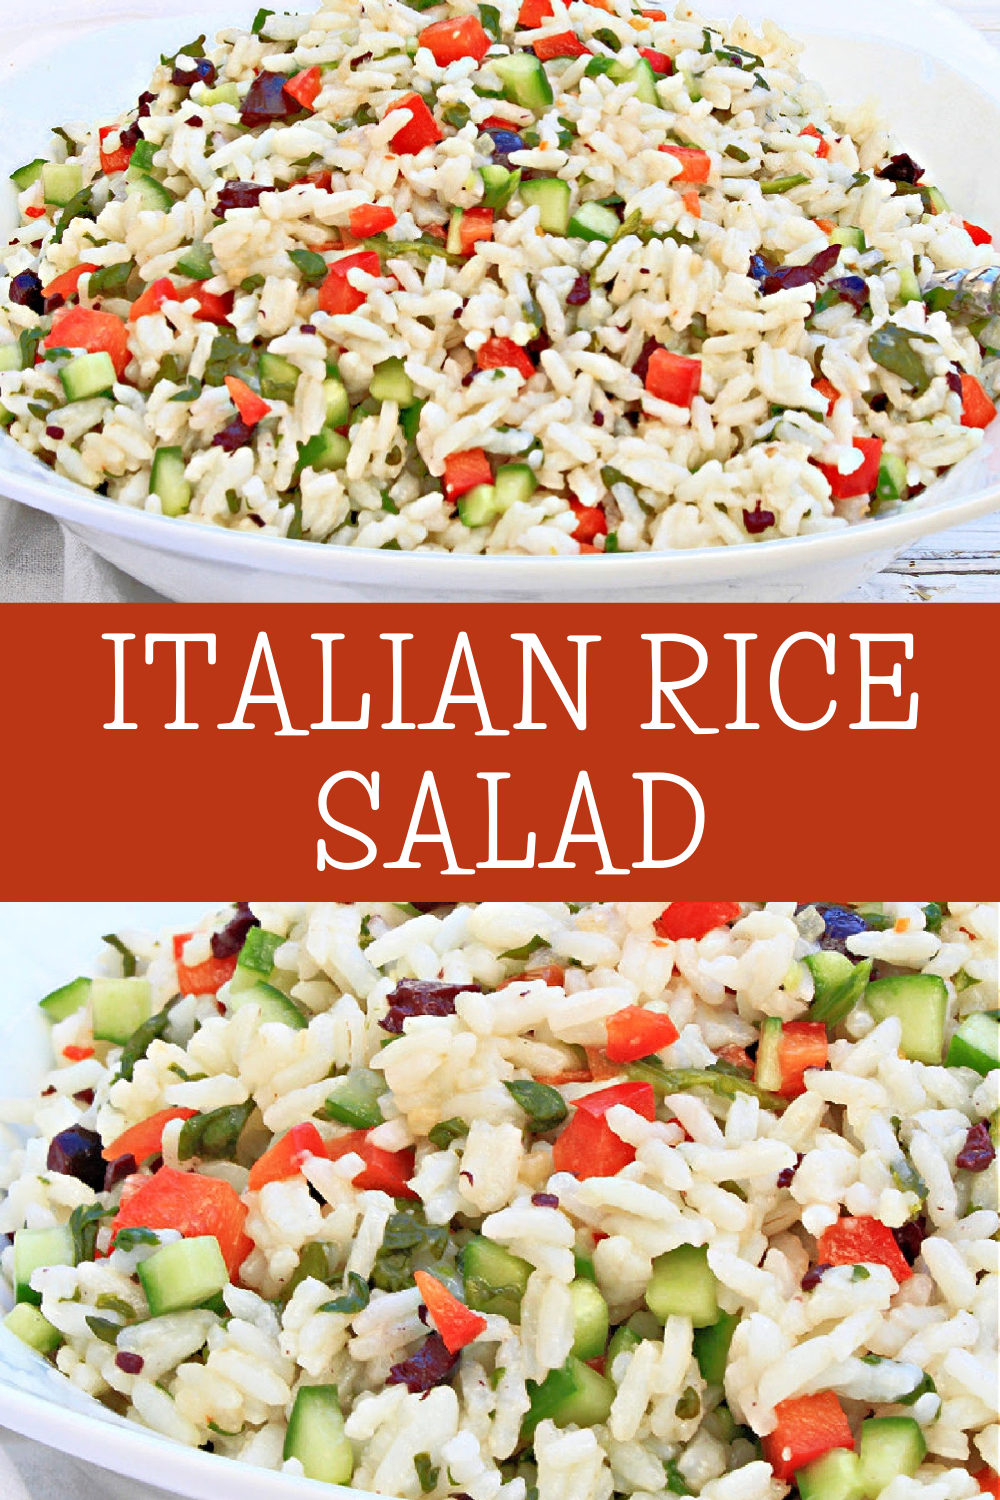 Italian Rice Salad ~ A light and easy grain salad with spinach, peppers, cucumbers, and olives tossed in Italian-style dressing. via @thiswifecooks